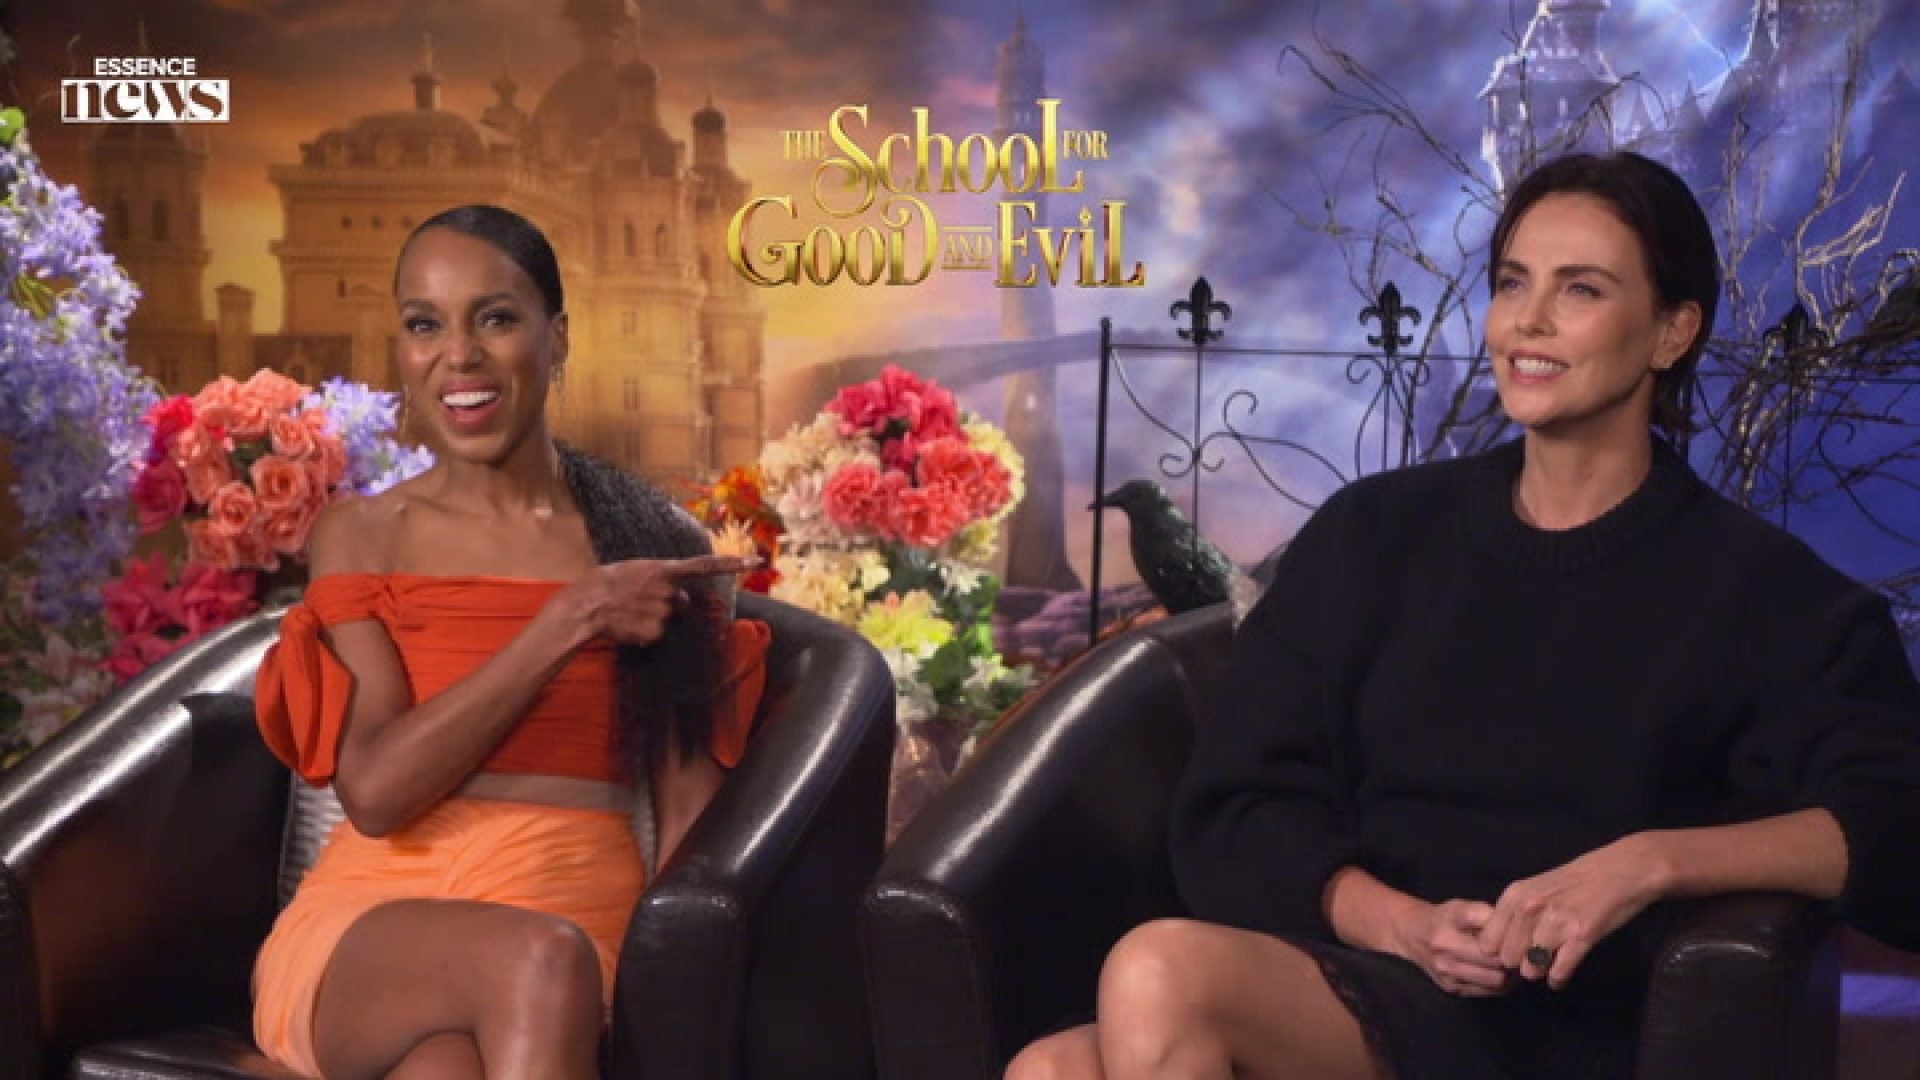 WATCH | Kerry Washington And Charlize Theron Share What They Enjoyed Most While Filming